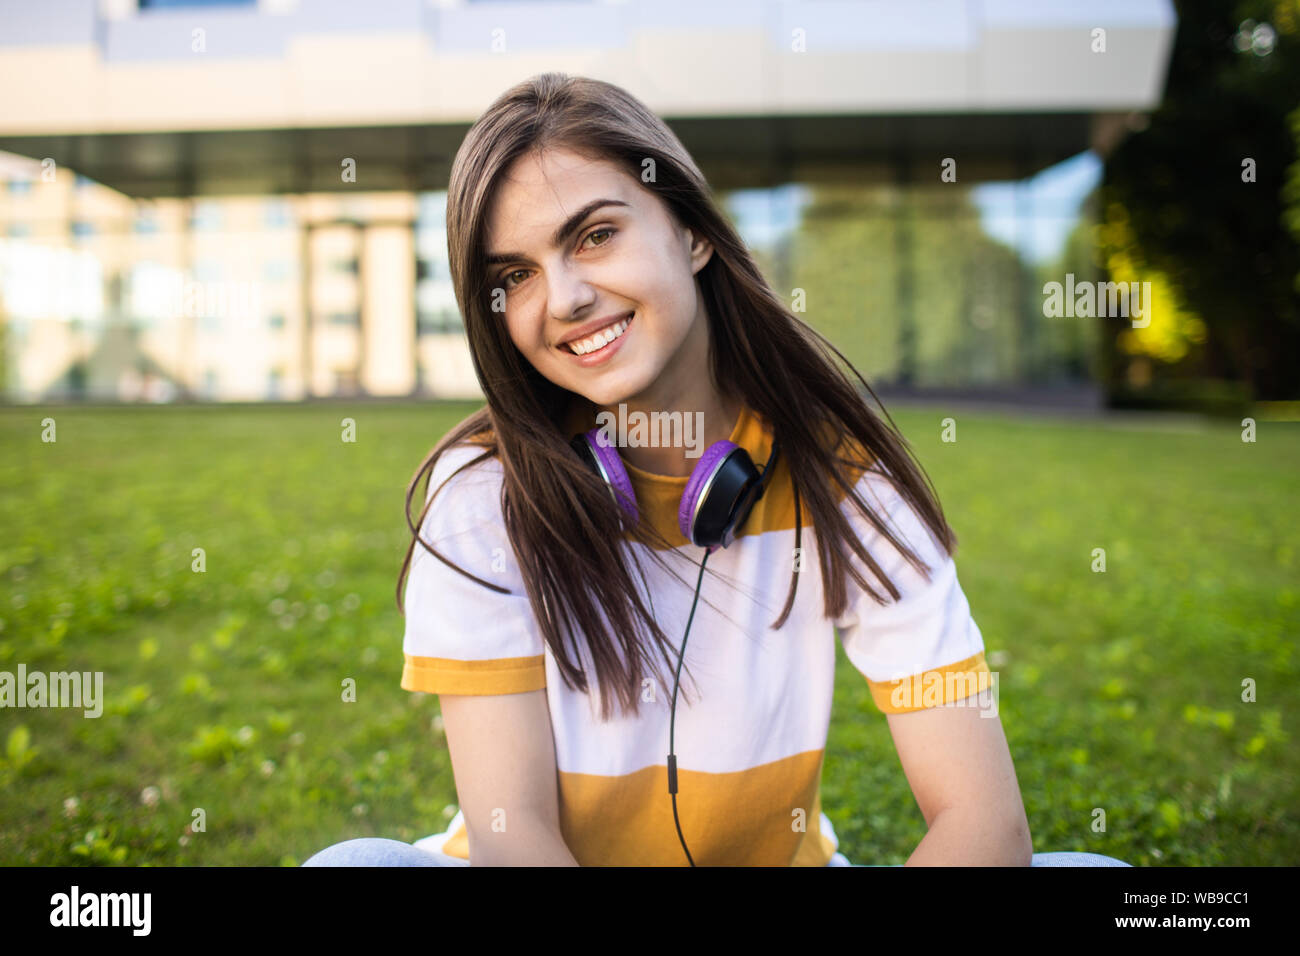 Portrait of smiling cute college girl with headphones posing in front of her alma mater Stock Photo